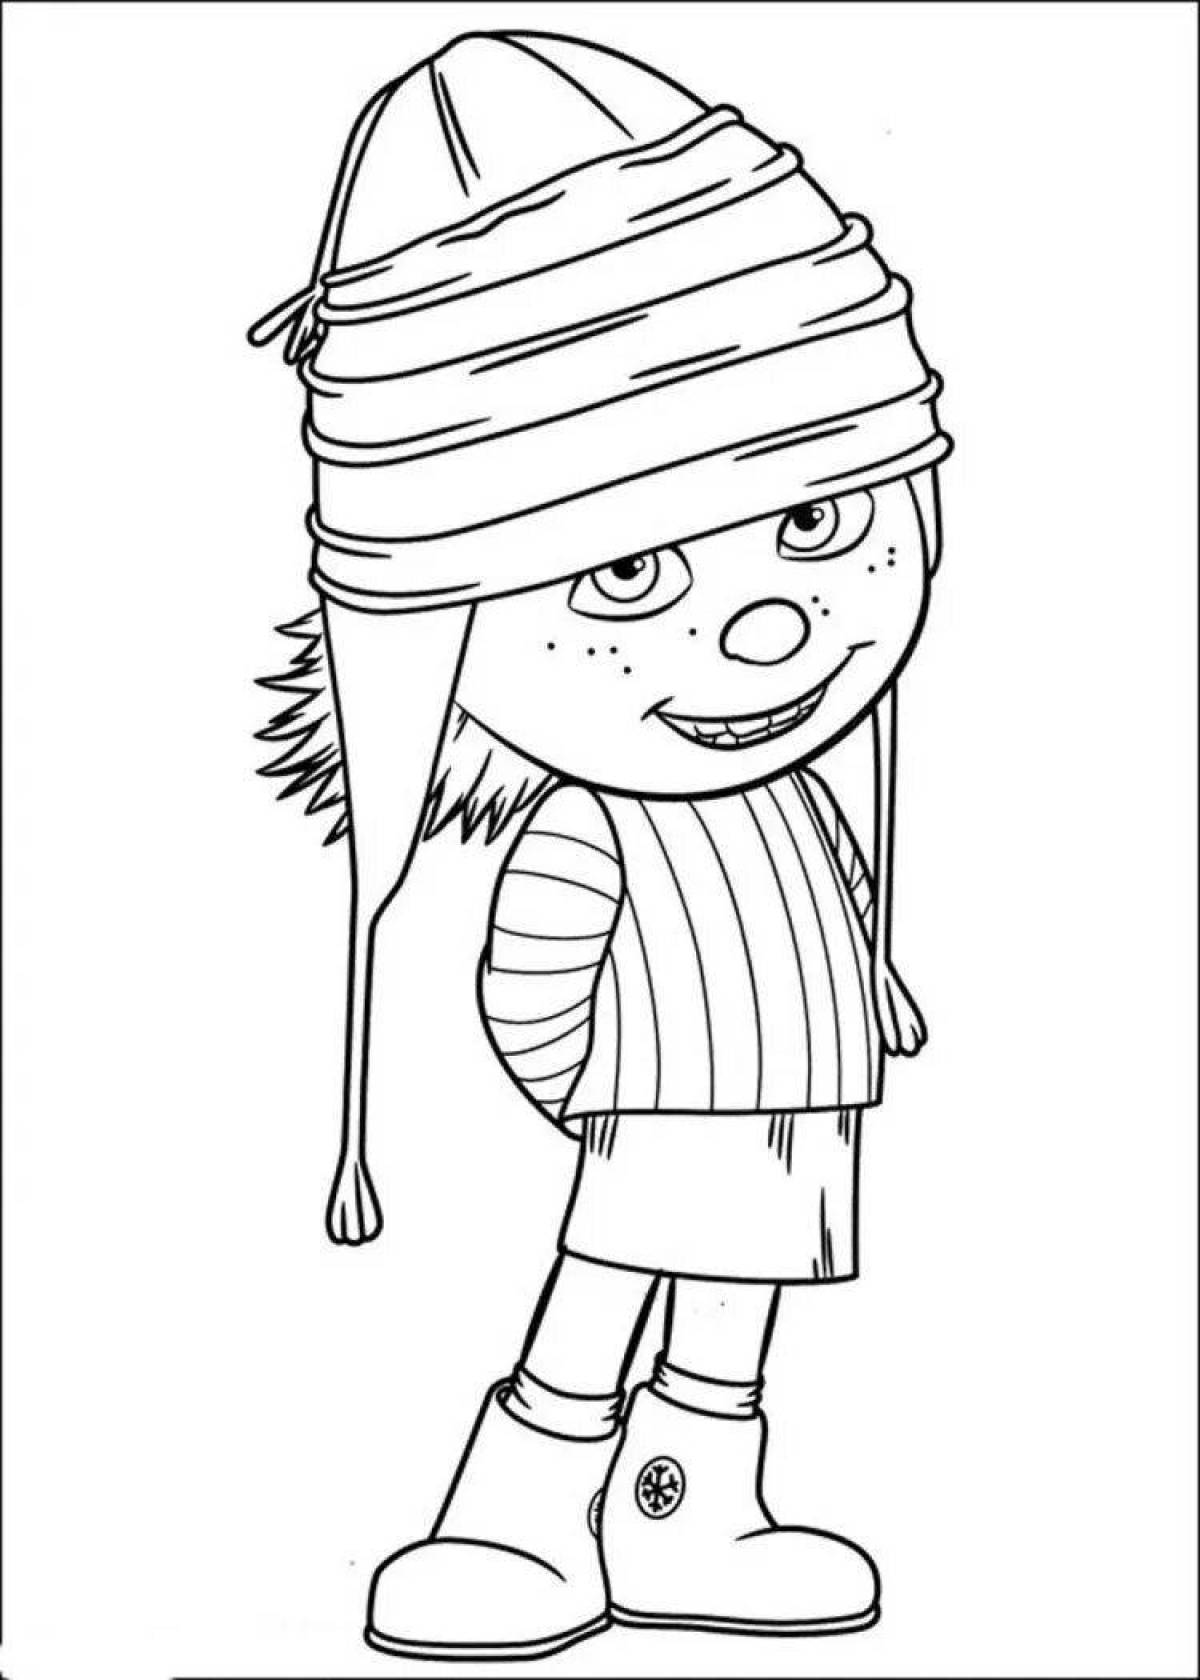 Agnes shining coloring book